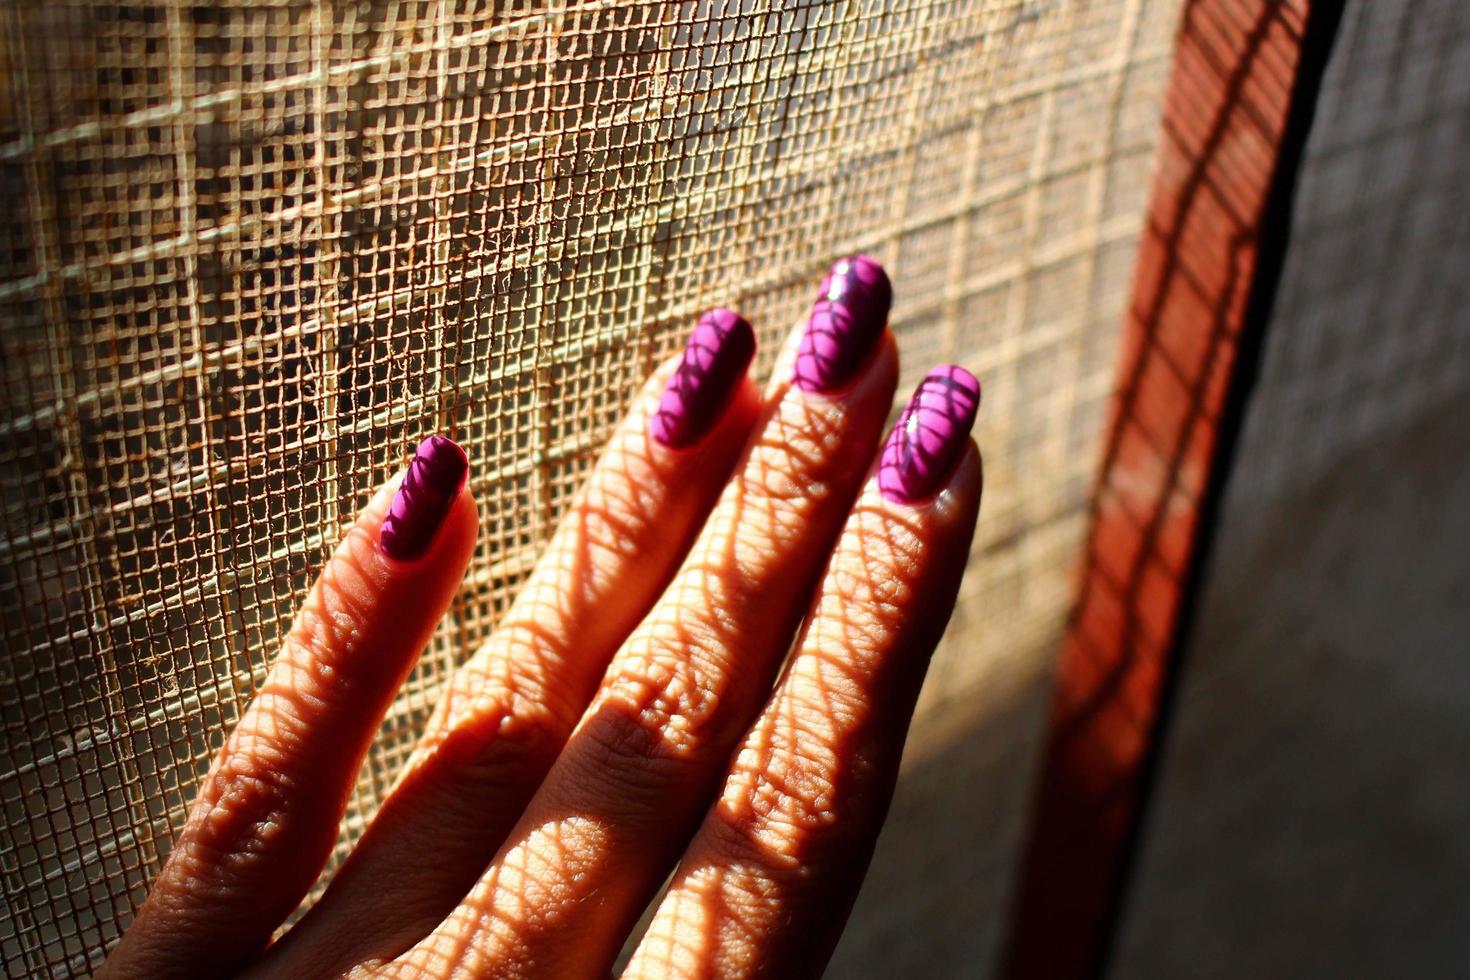 Closeup of woman's hand with painted nails in sunlight photo